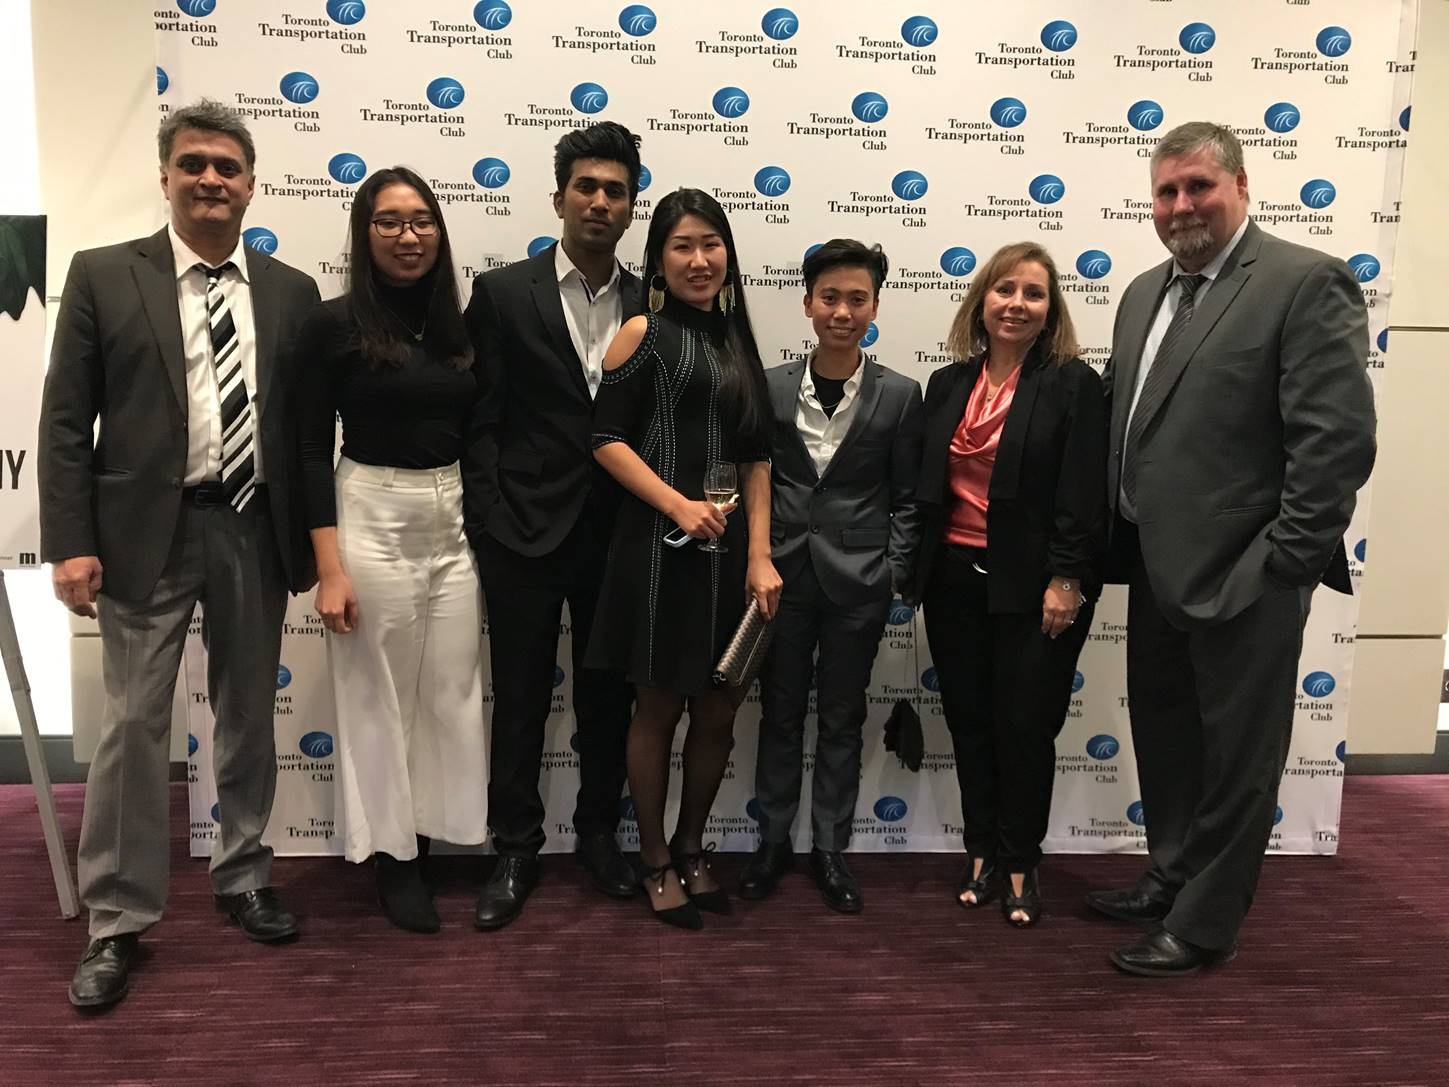 Faculty and Students Attend 2019 Annual Toronto Transportation Club Dinner